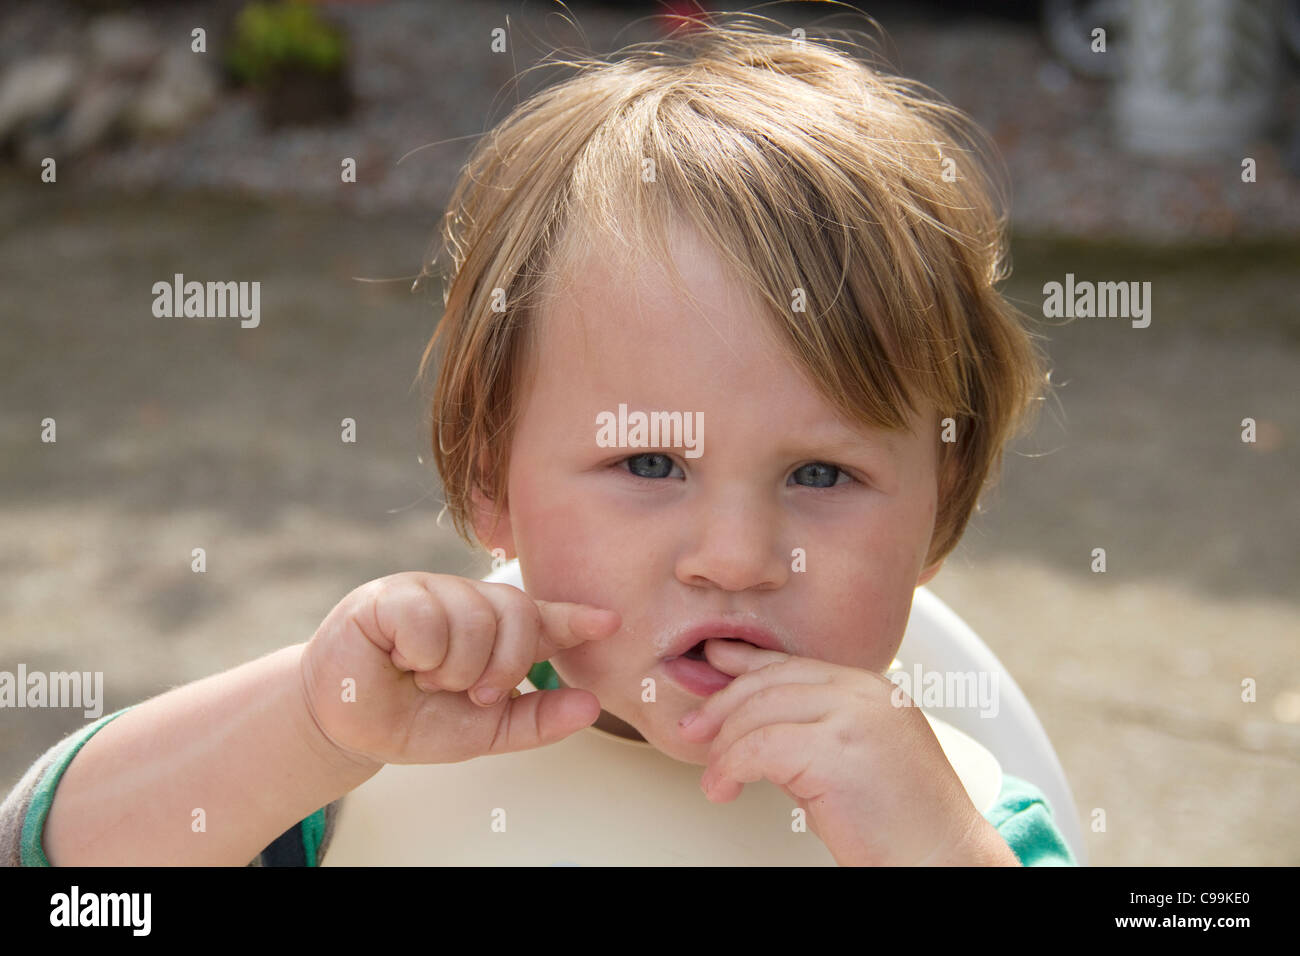 Toddler looking bemused after food Stock Photo